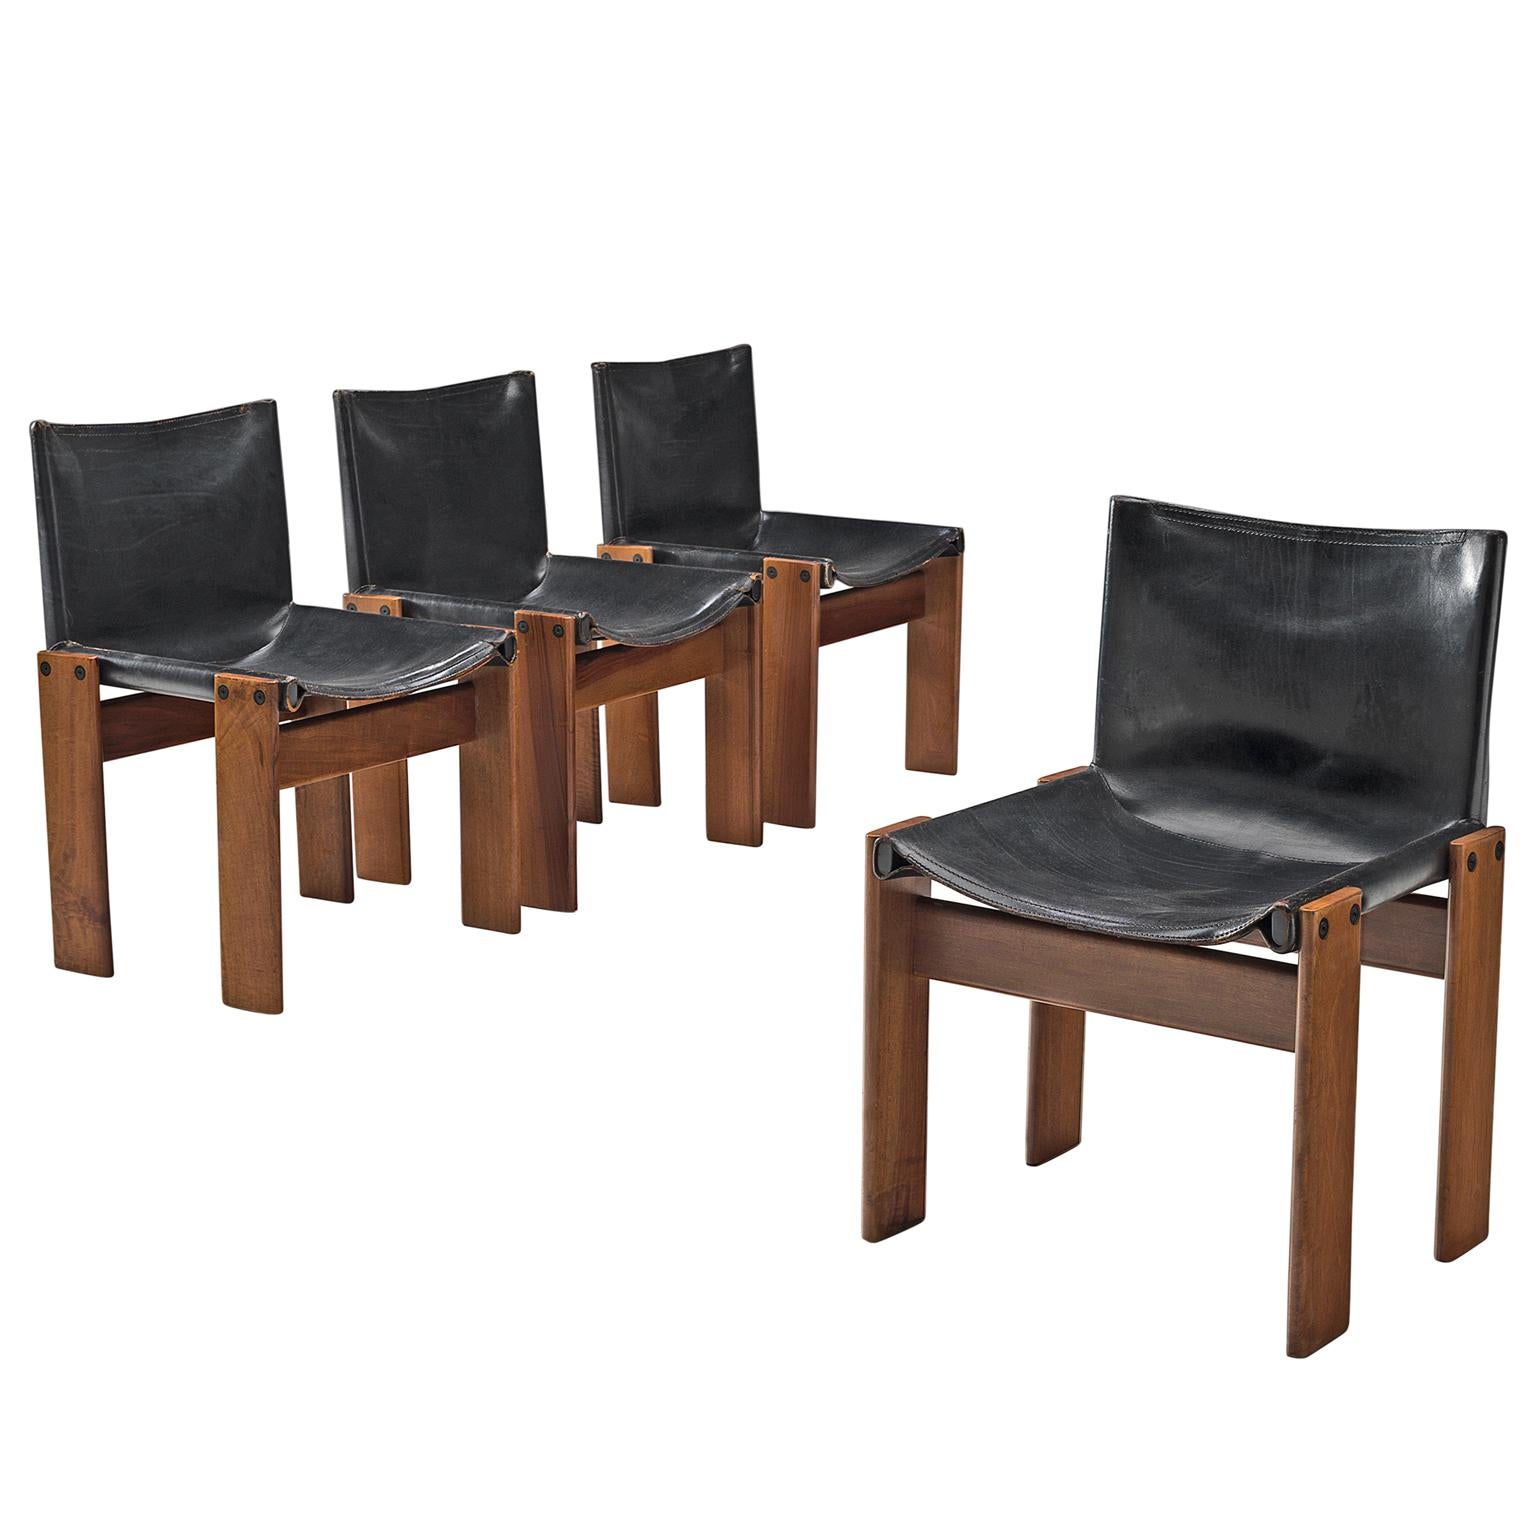 Afra & Tobia Scarpa 'Monk' Set of Four Chairs in Black Leather